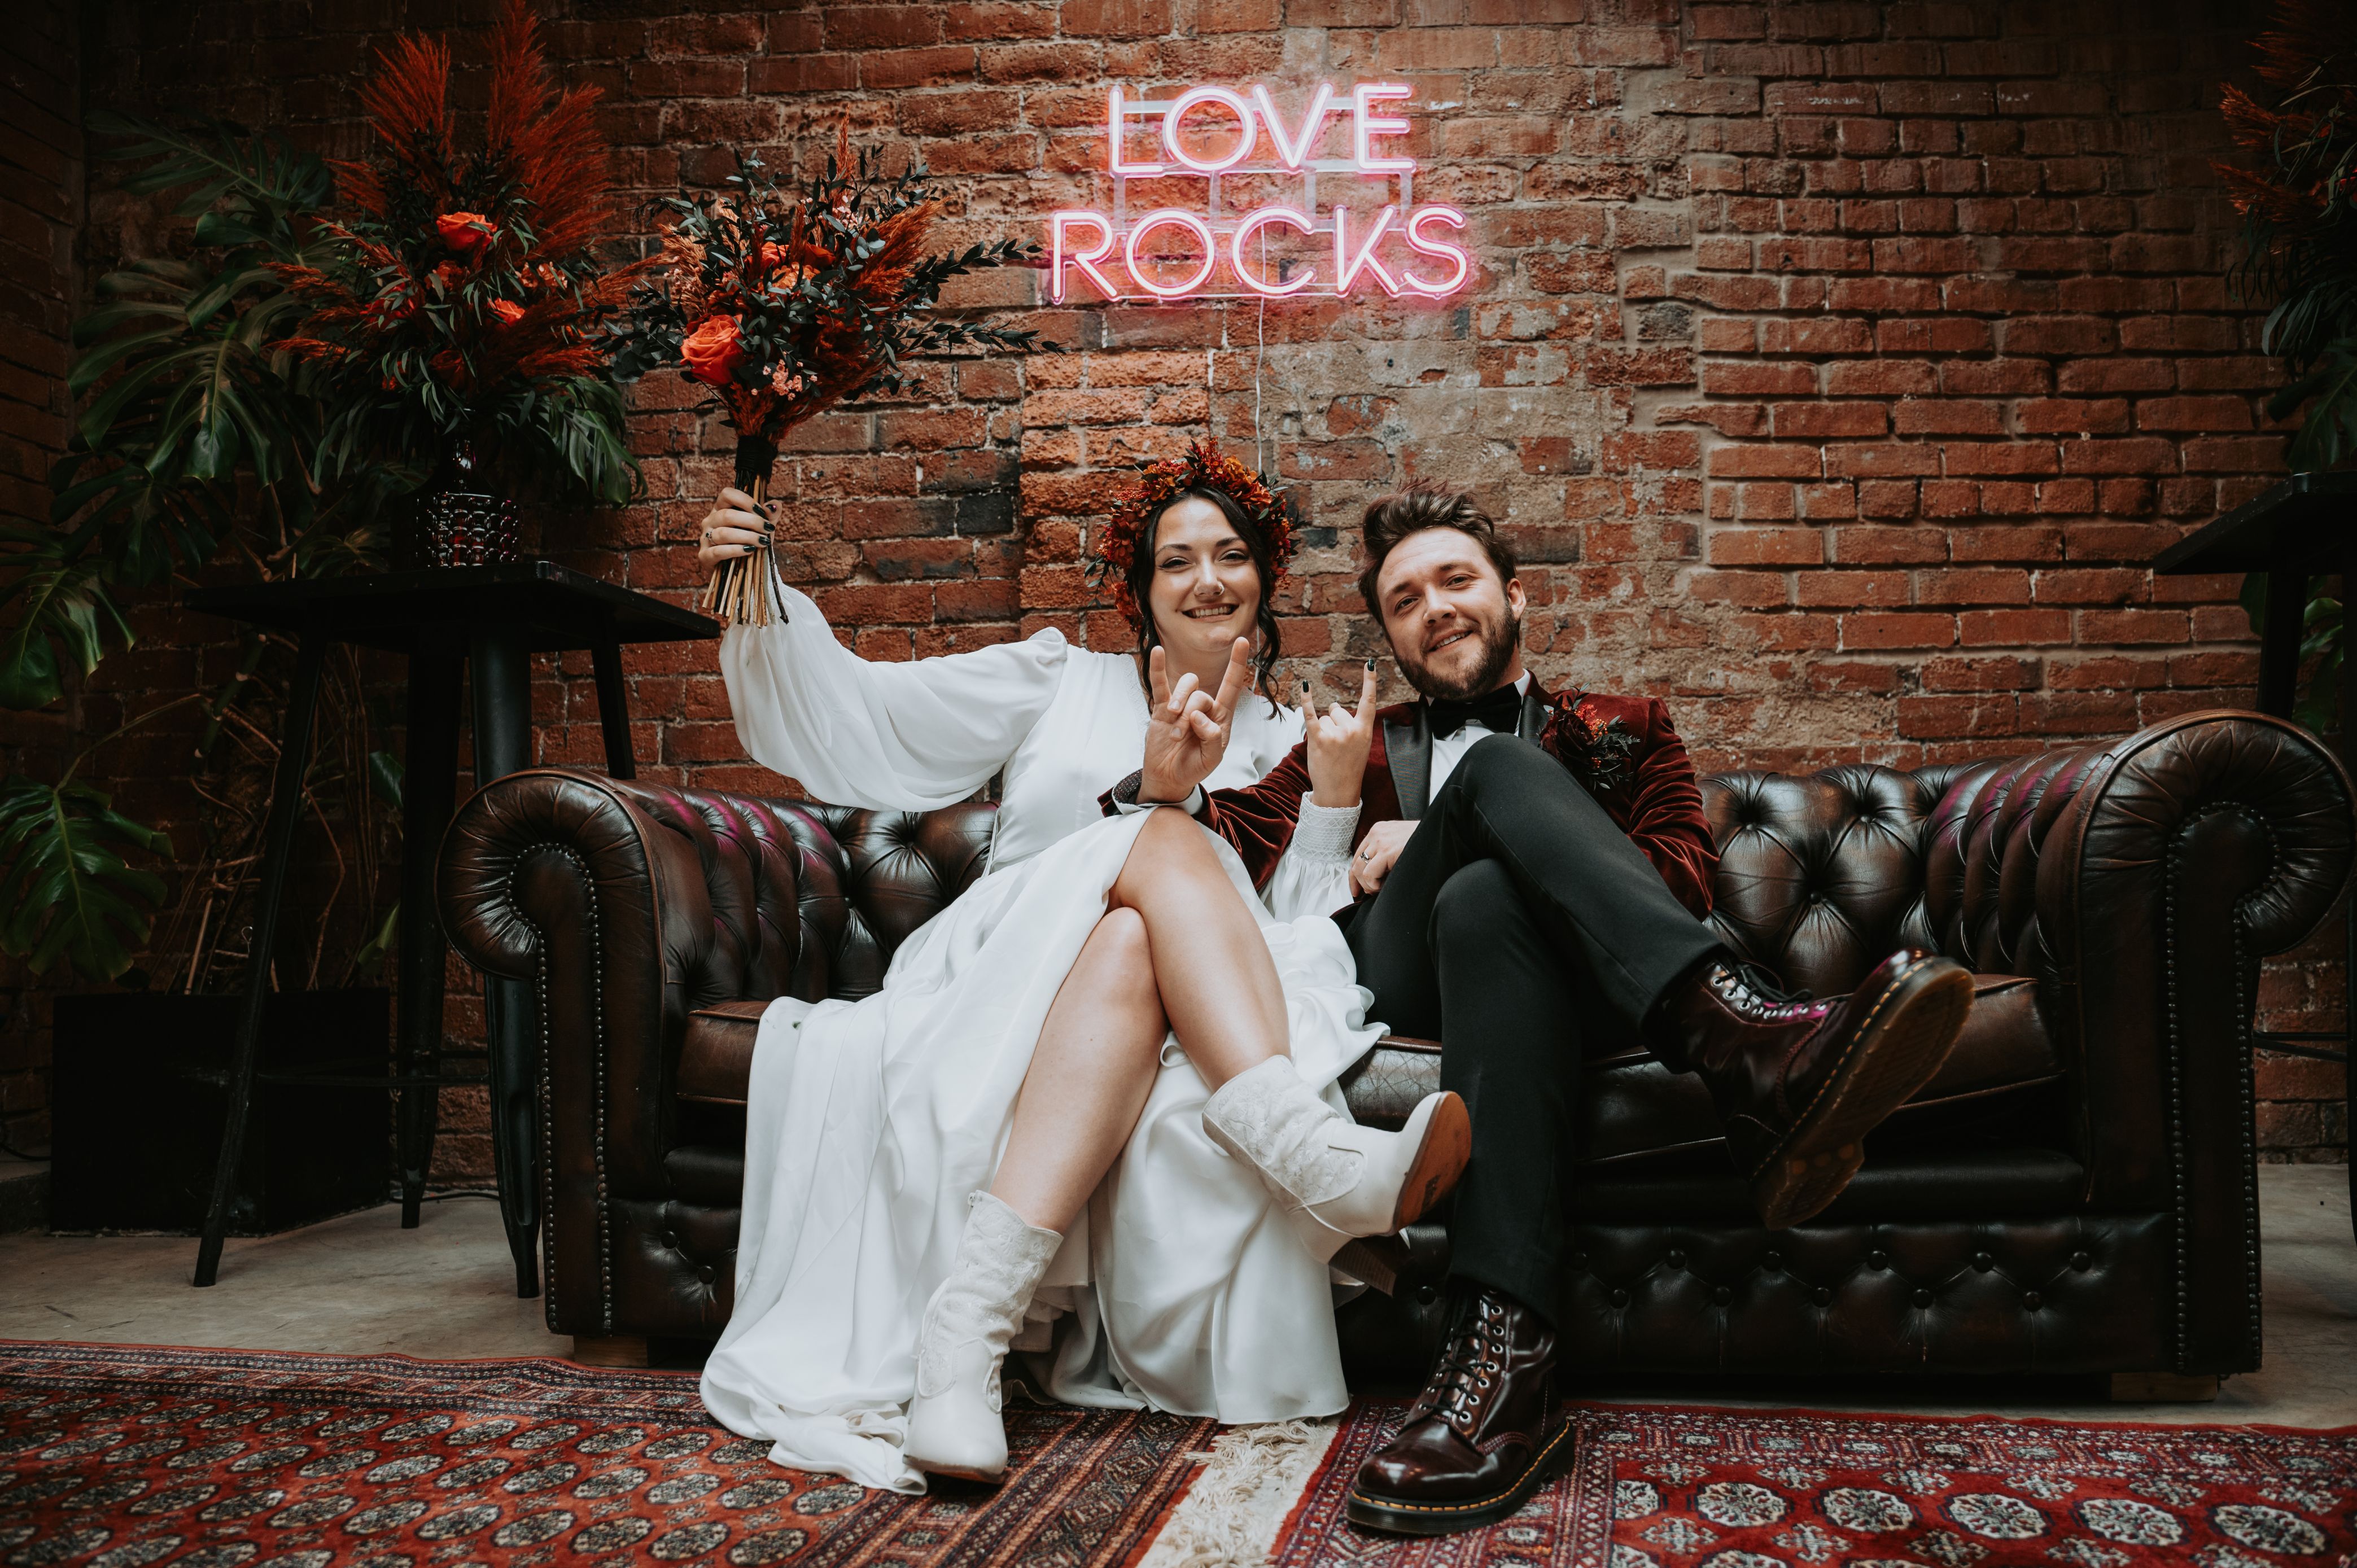 newlyweds sat together on a black leather sofa at the shack revolution industrial wedding venue in hereford with a neon love rocks sign behind